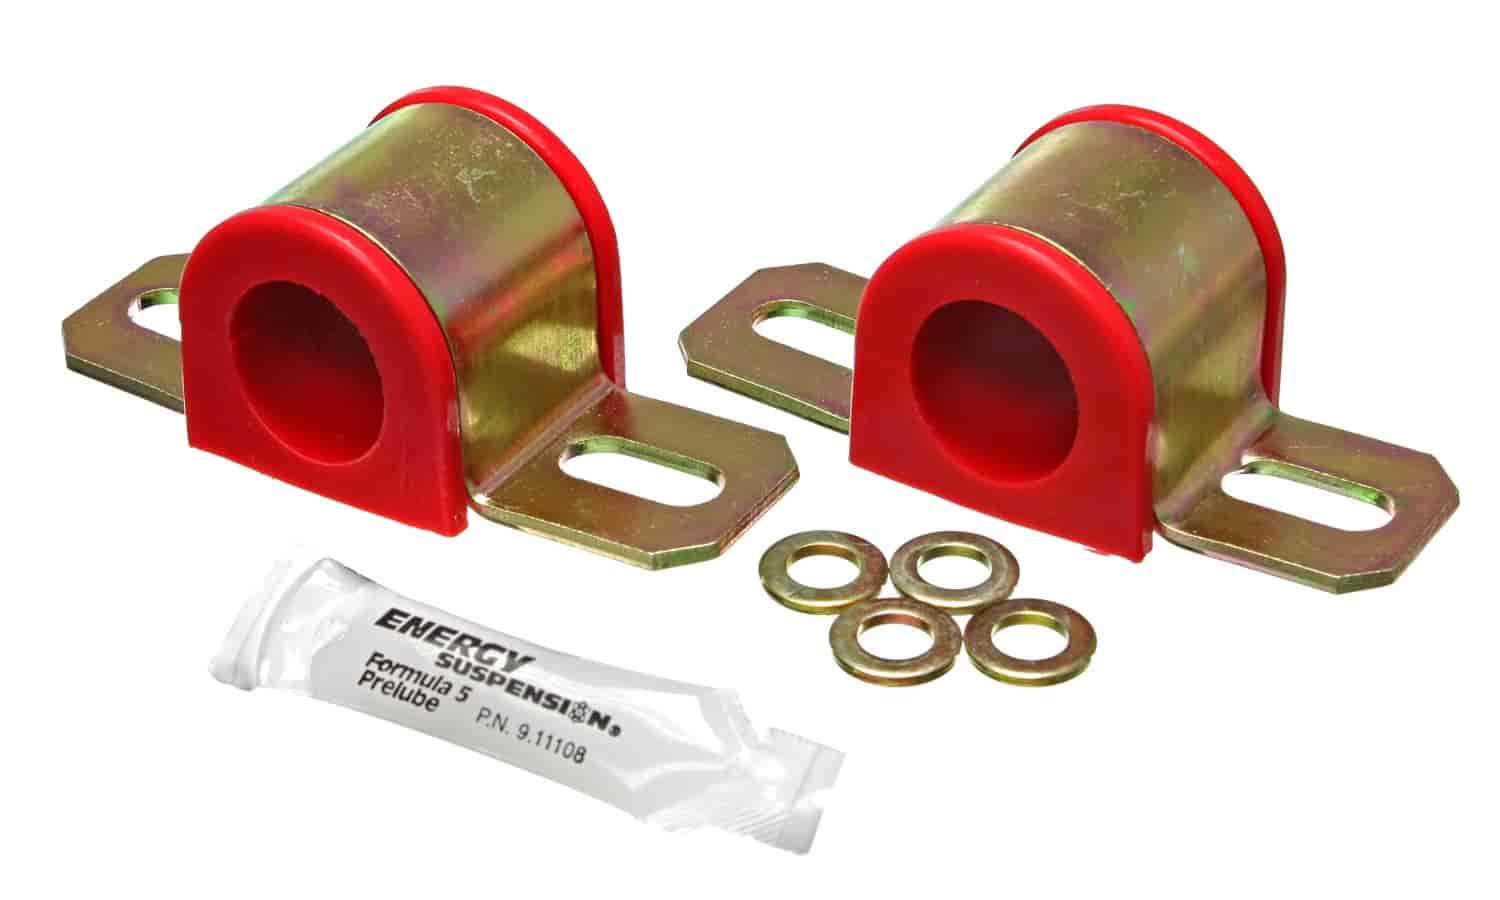 Universal Non-Greaseable Sway Bar Bushings 1-1/16" or 27mm